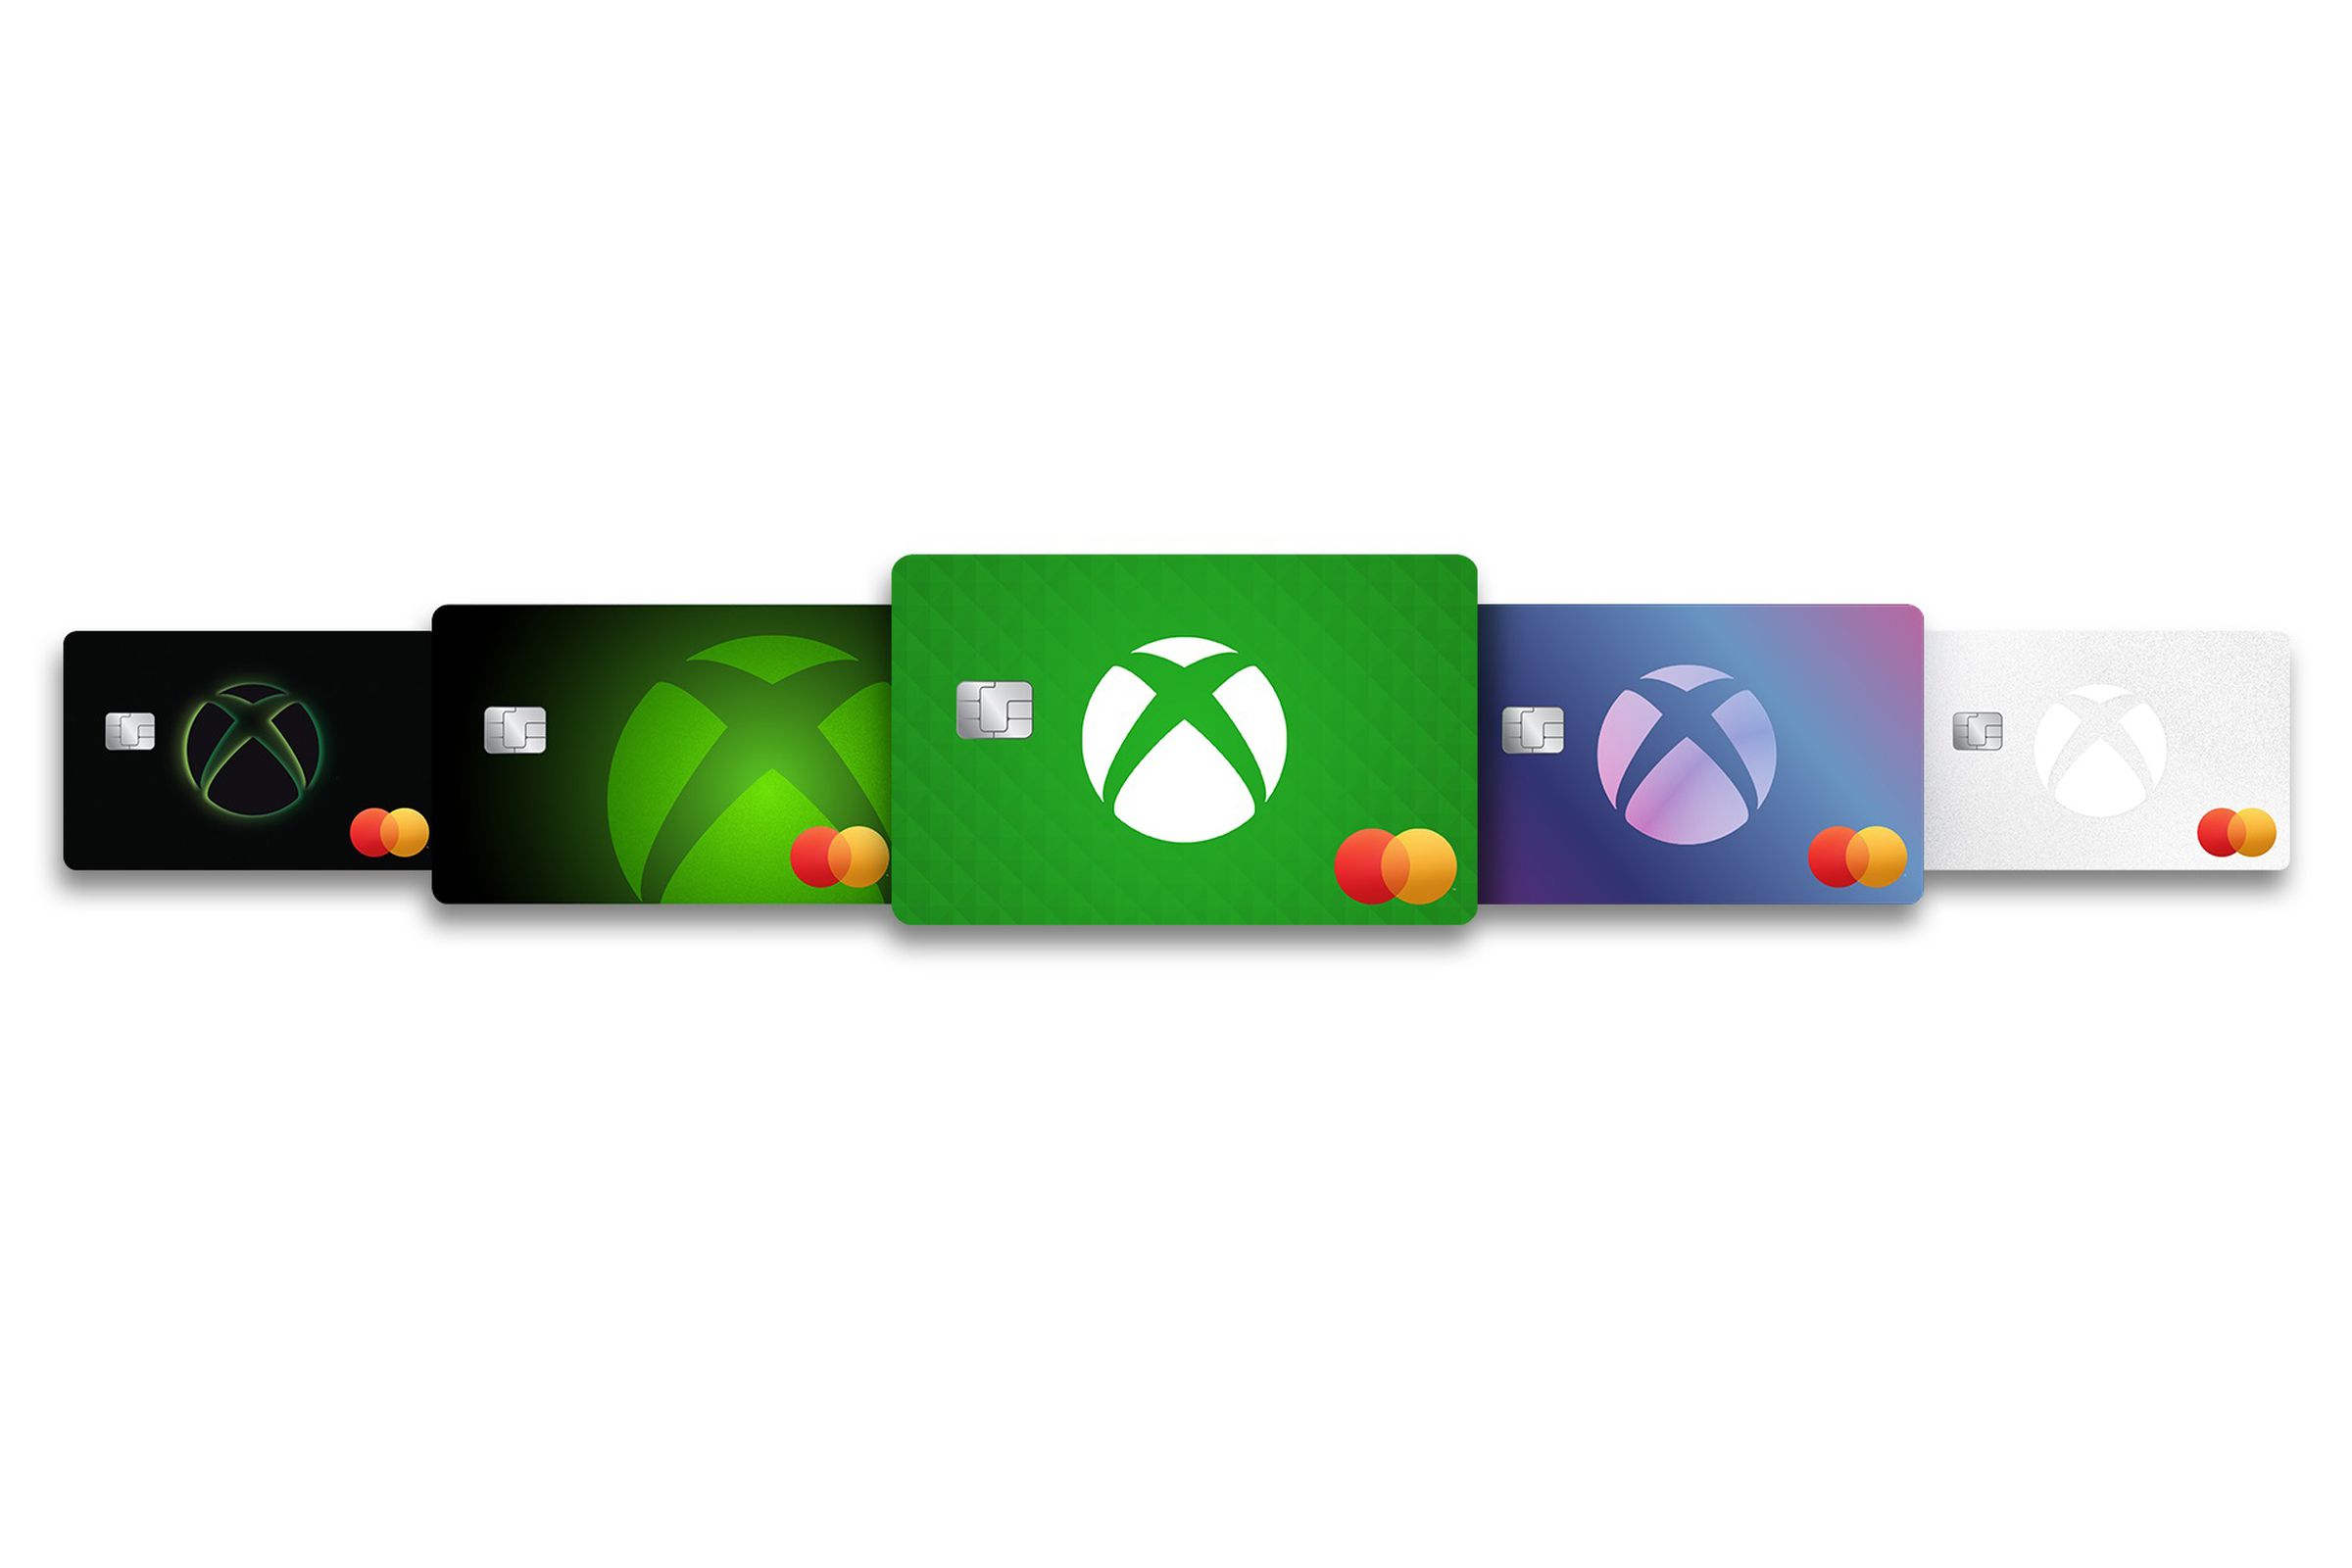 A selection of Xbox Mastercard options